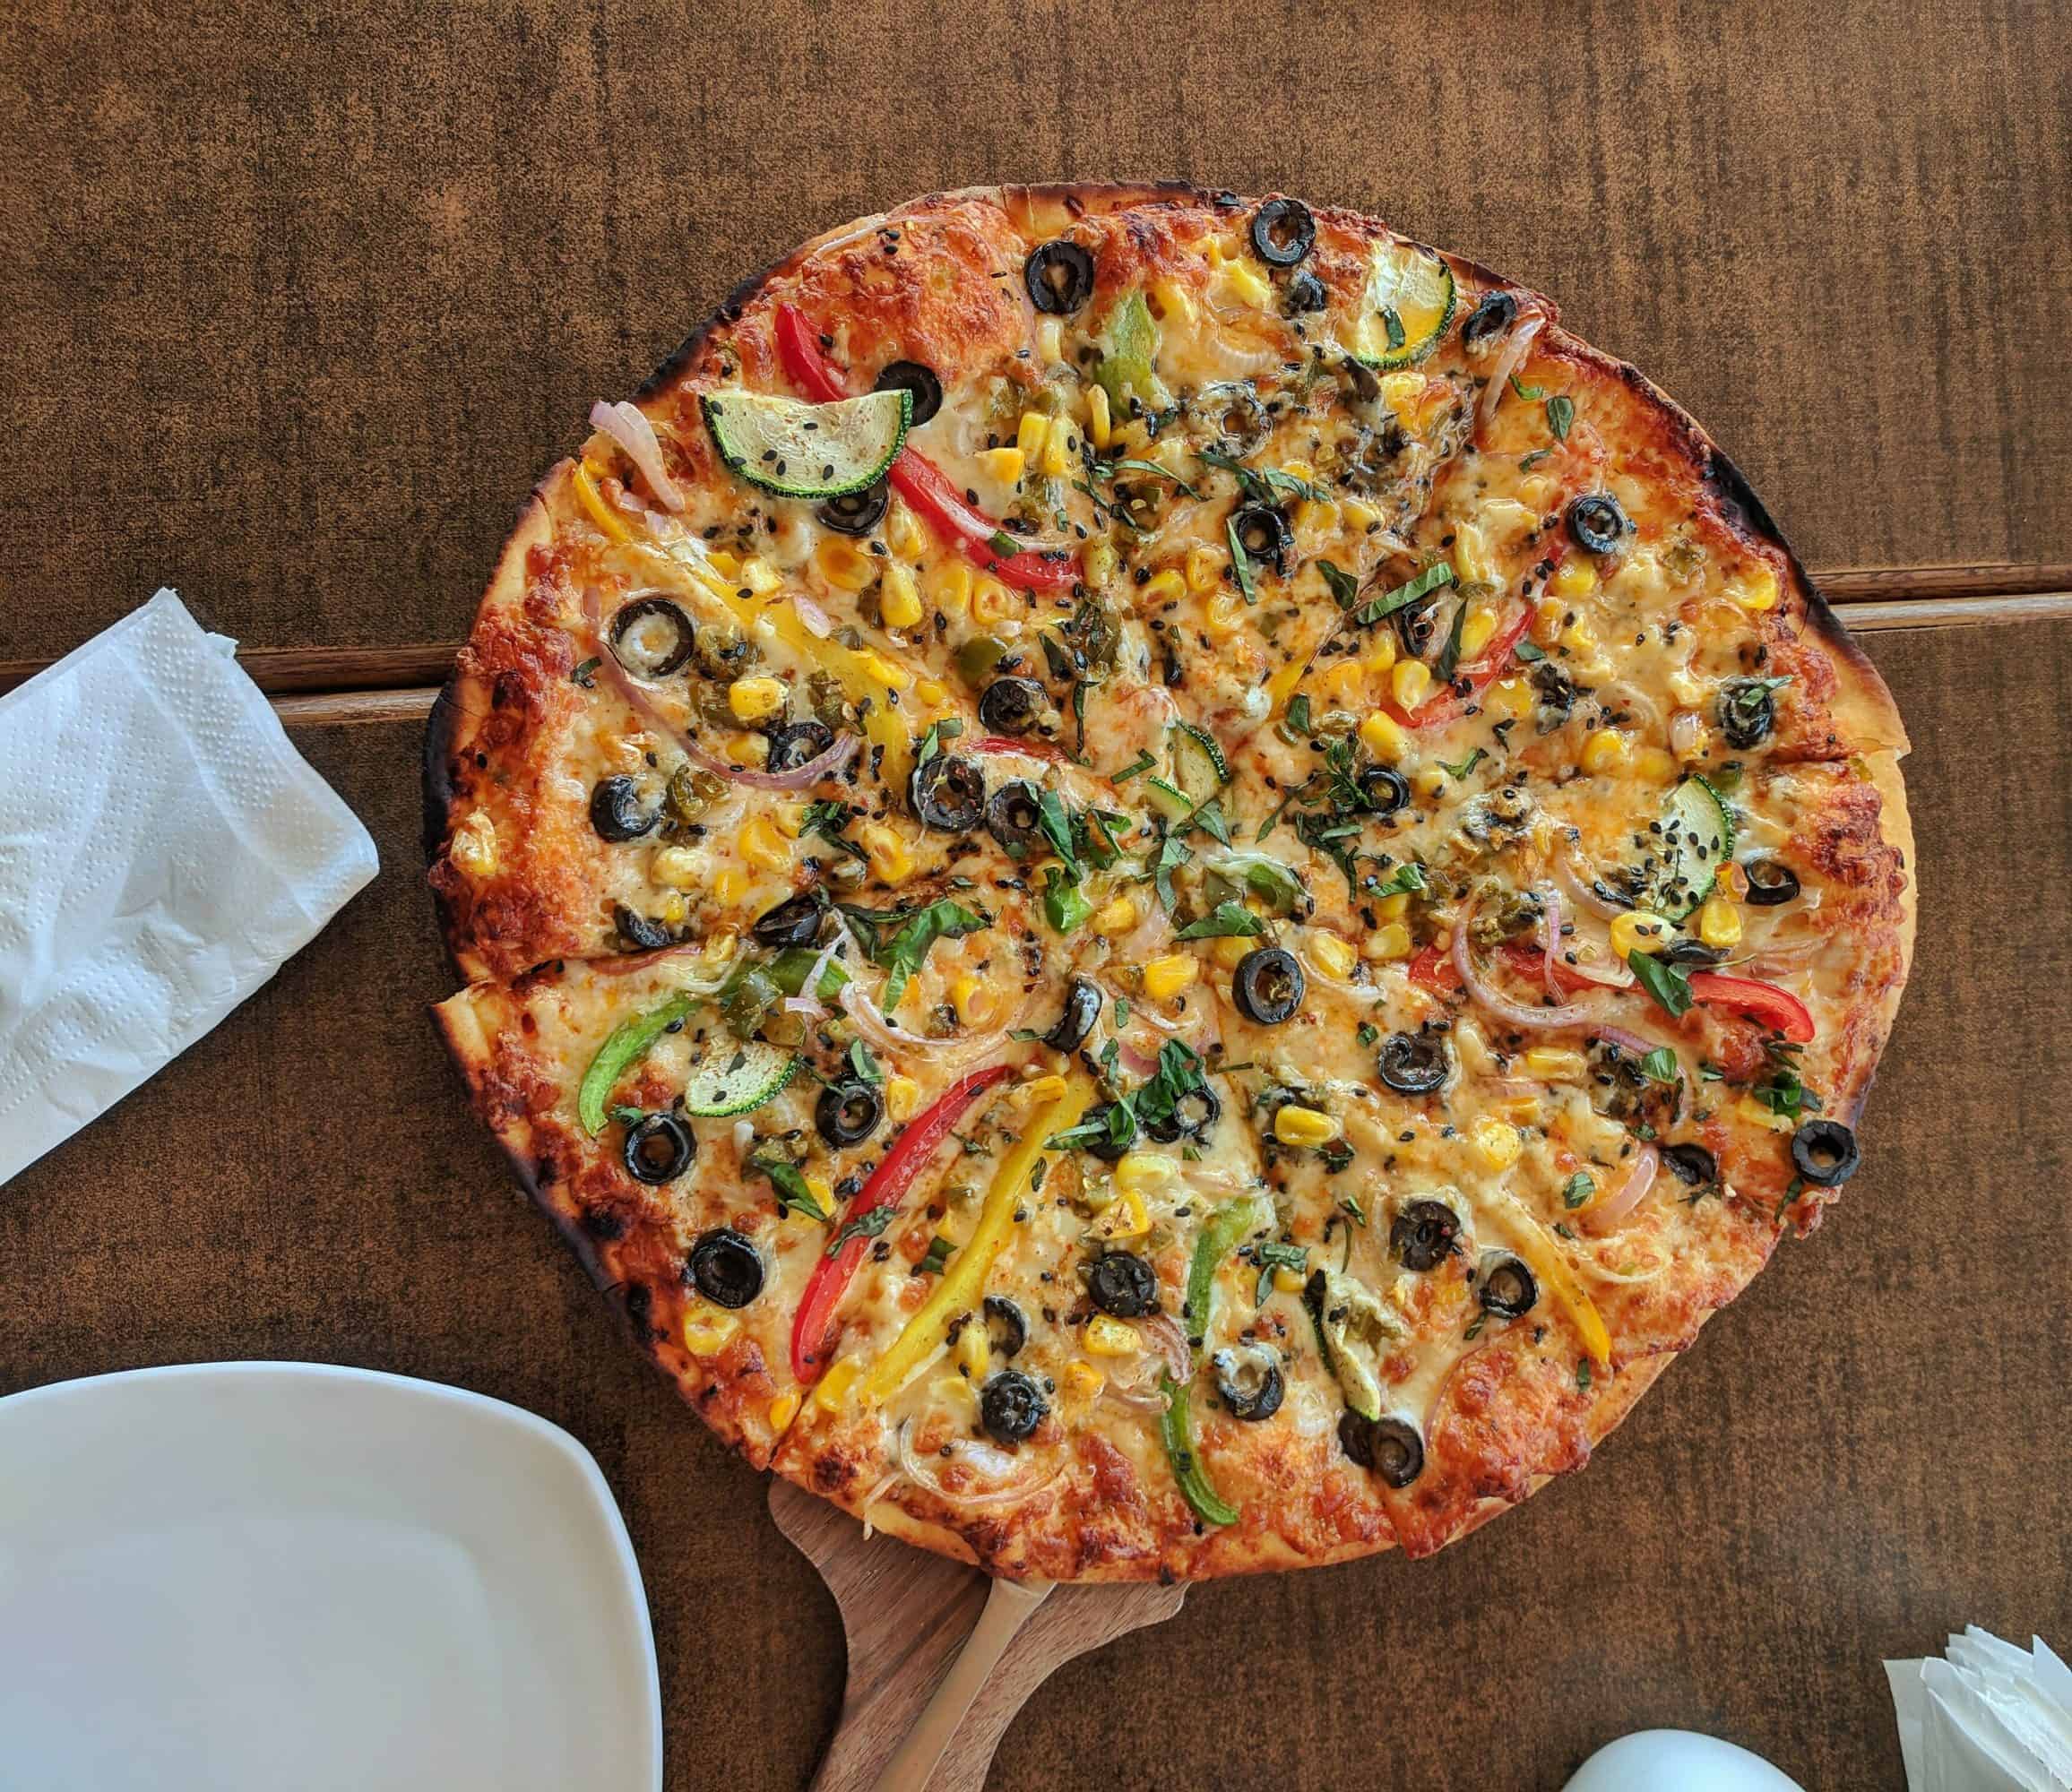 Pizza topping ideas to make homemade pizza more exciting! This list of pizza toppings range from classic to unique, and can be combined for unique combos!